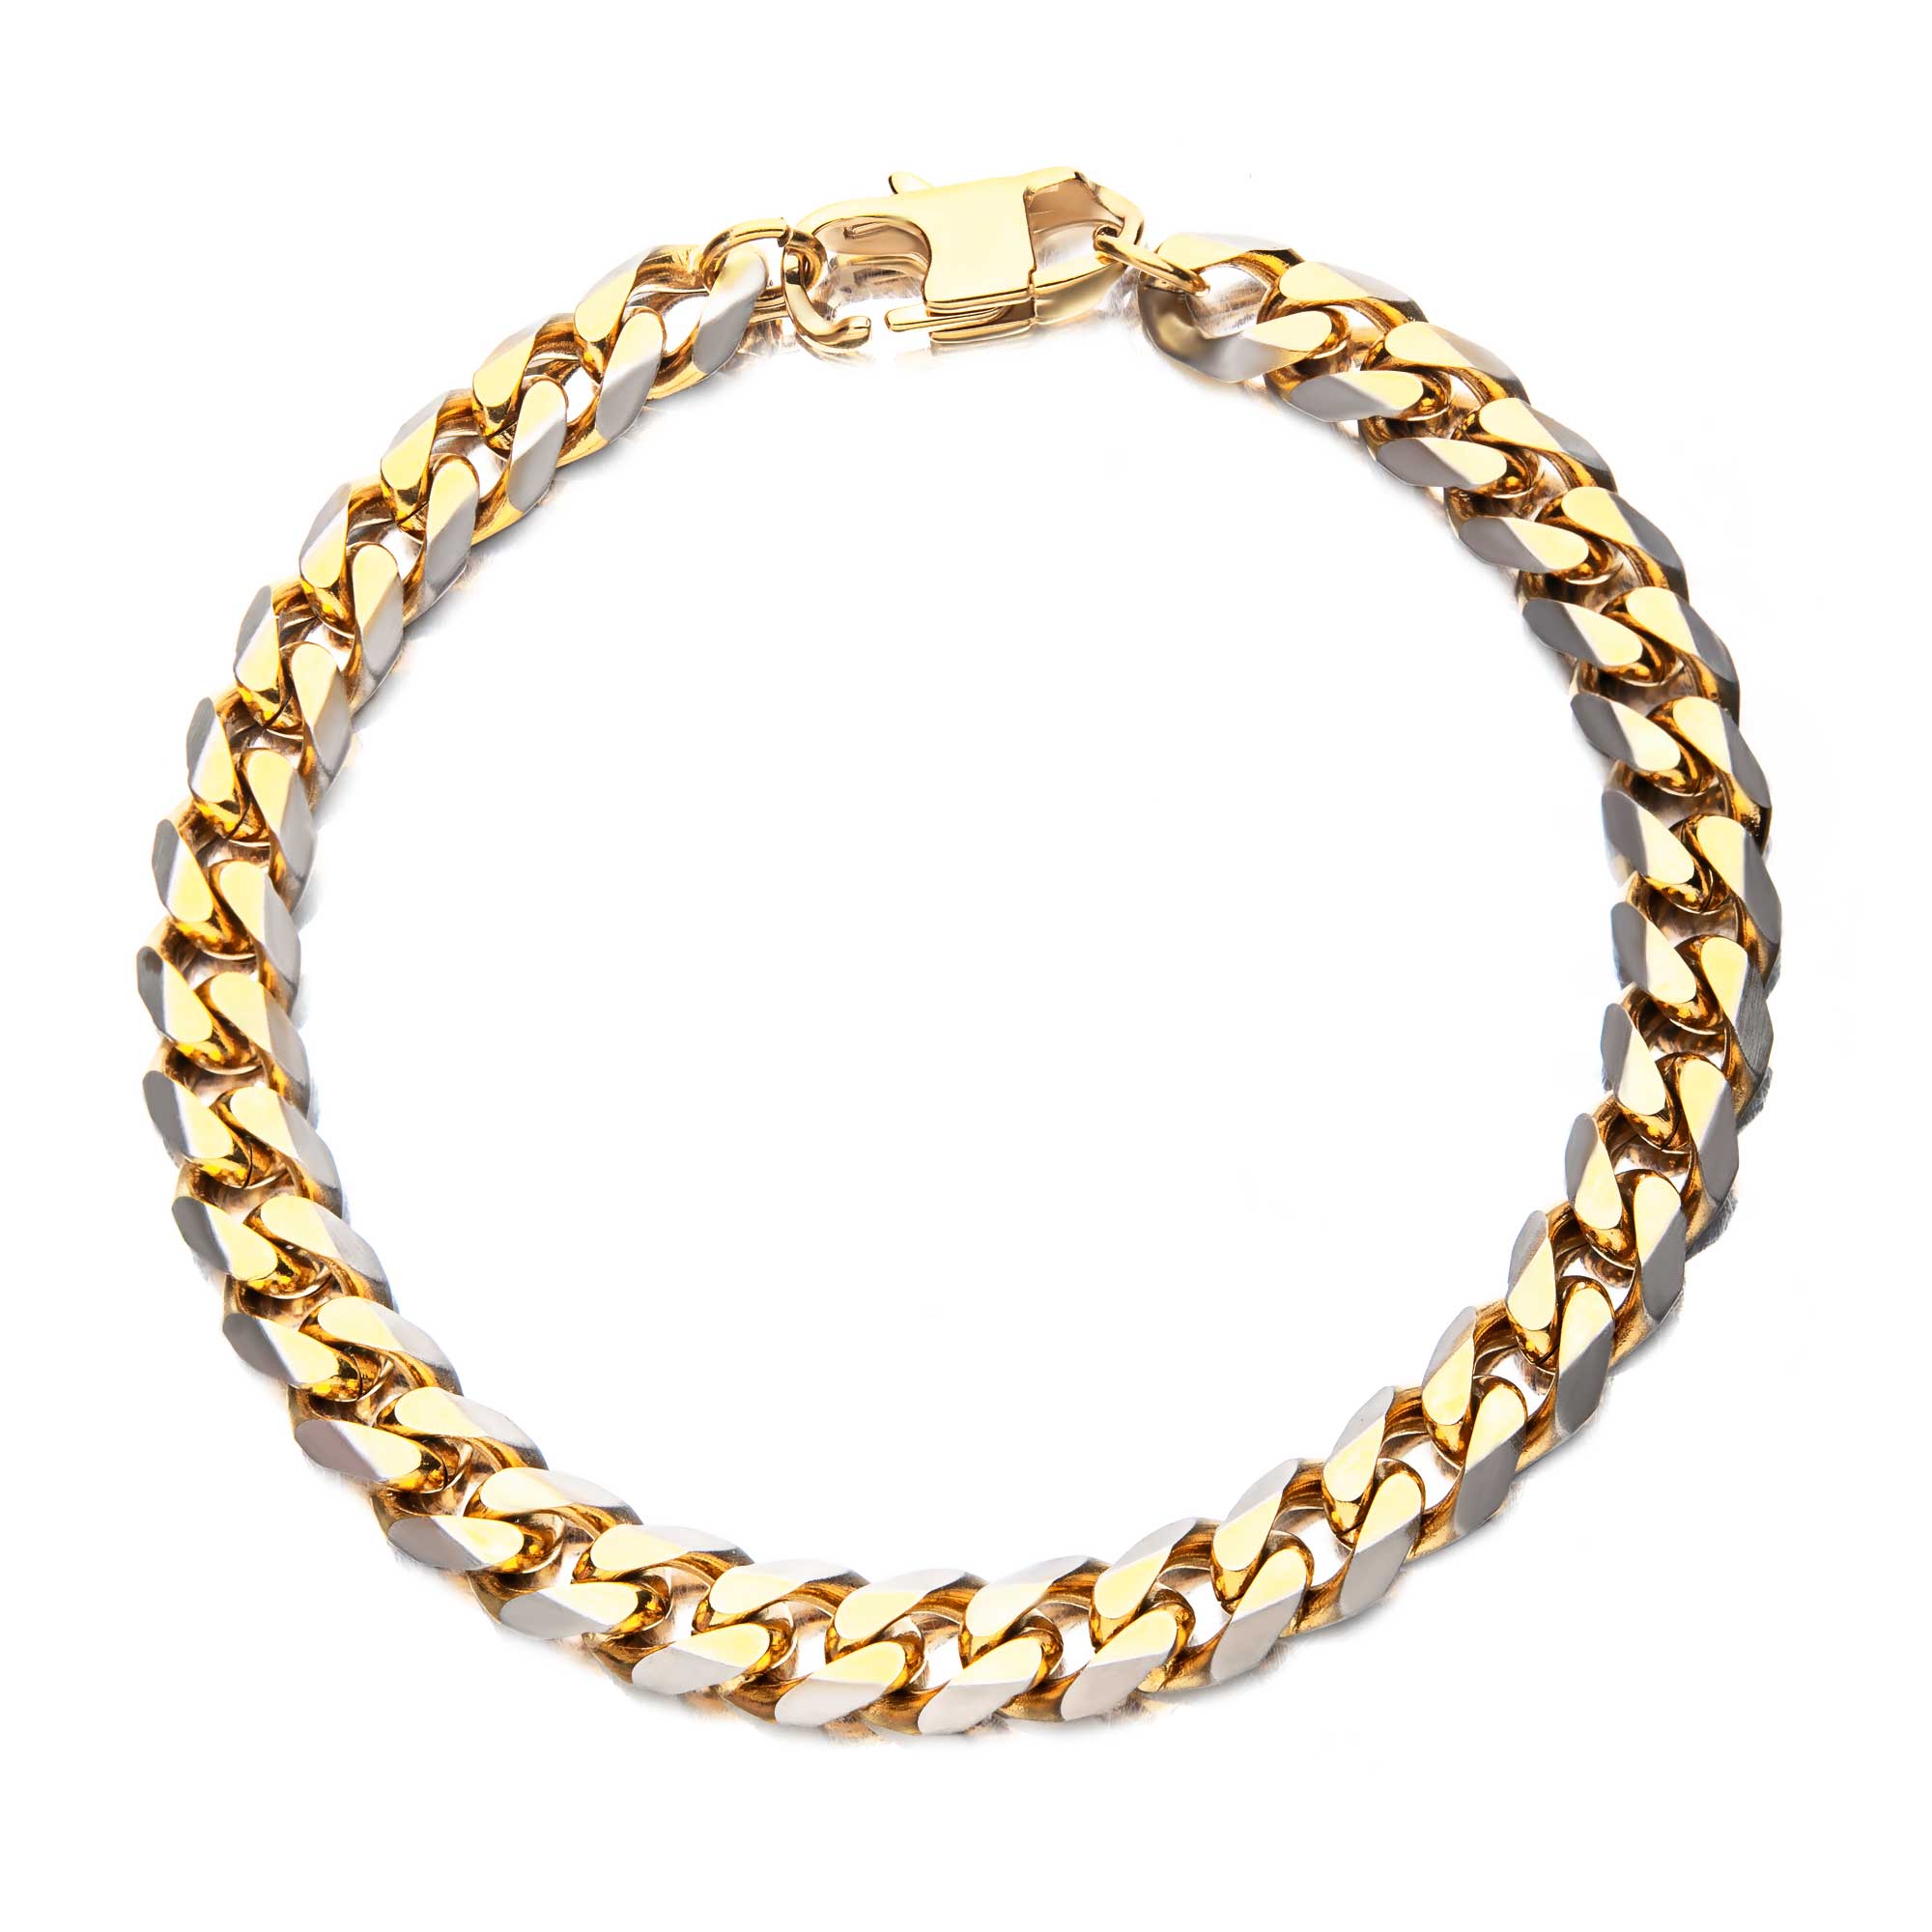 Stainless Steel Gold Plated 8mm Curb Chain with Lobster Clasp Image 2 Enchanted Jewelry Plainfield, CT